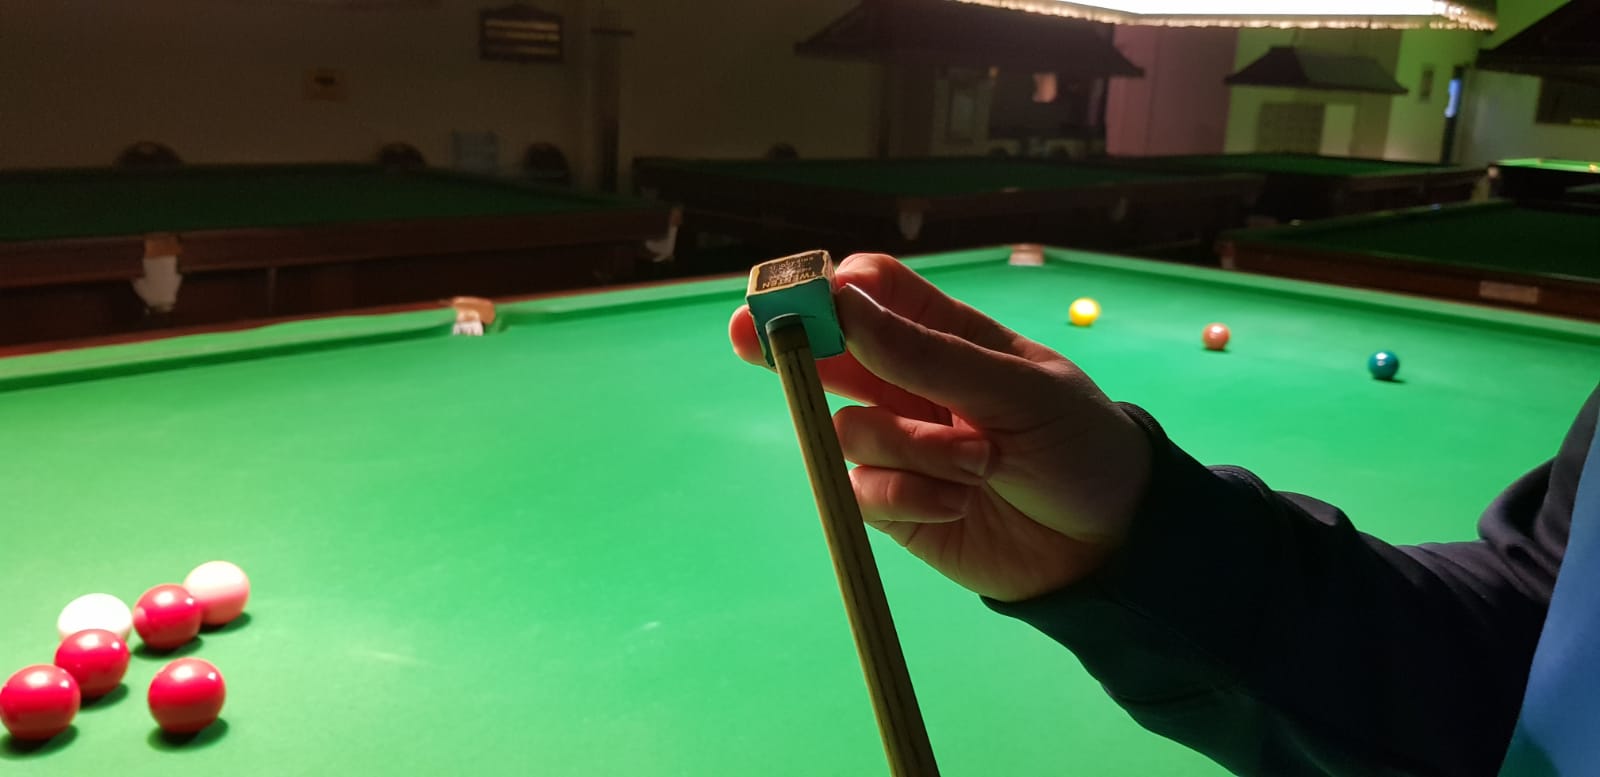 Snooker gamesmanship: 4 little white lies old-school amateurs use to put you off your game